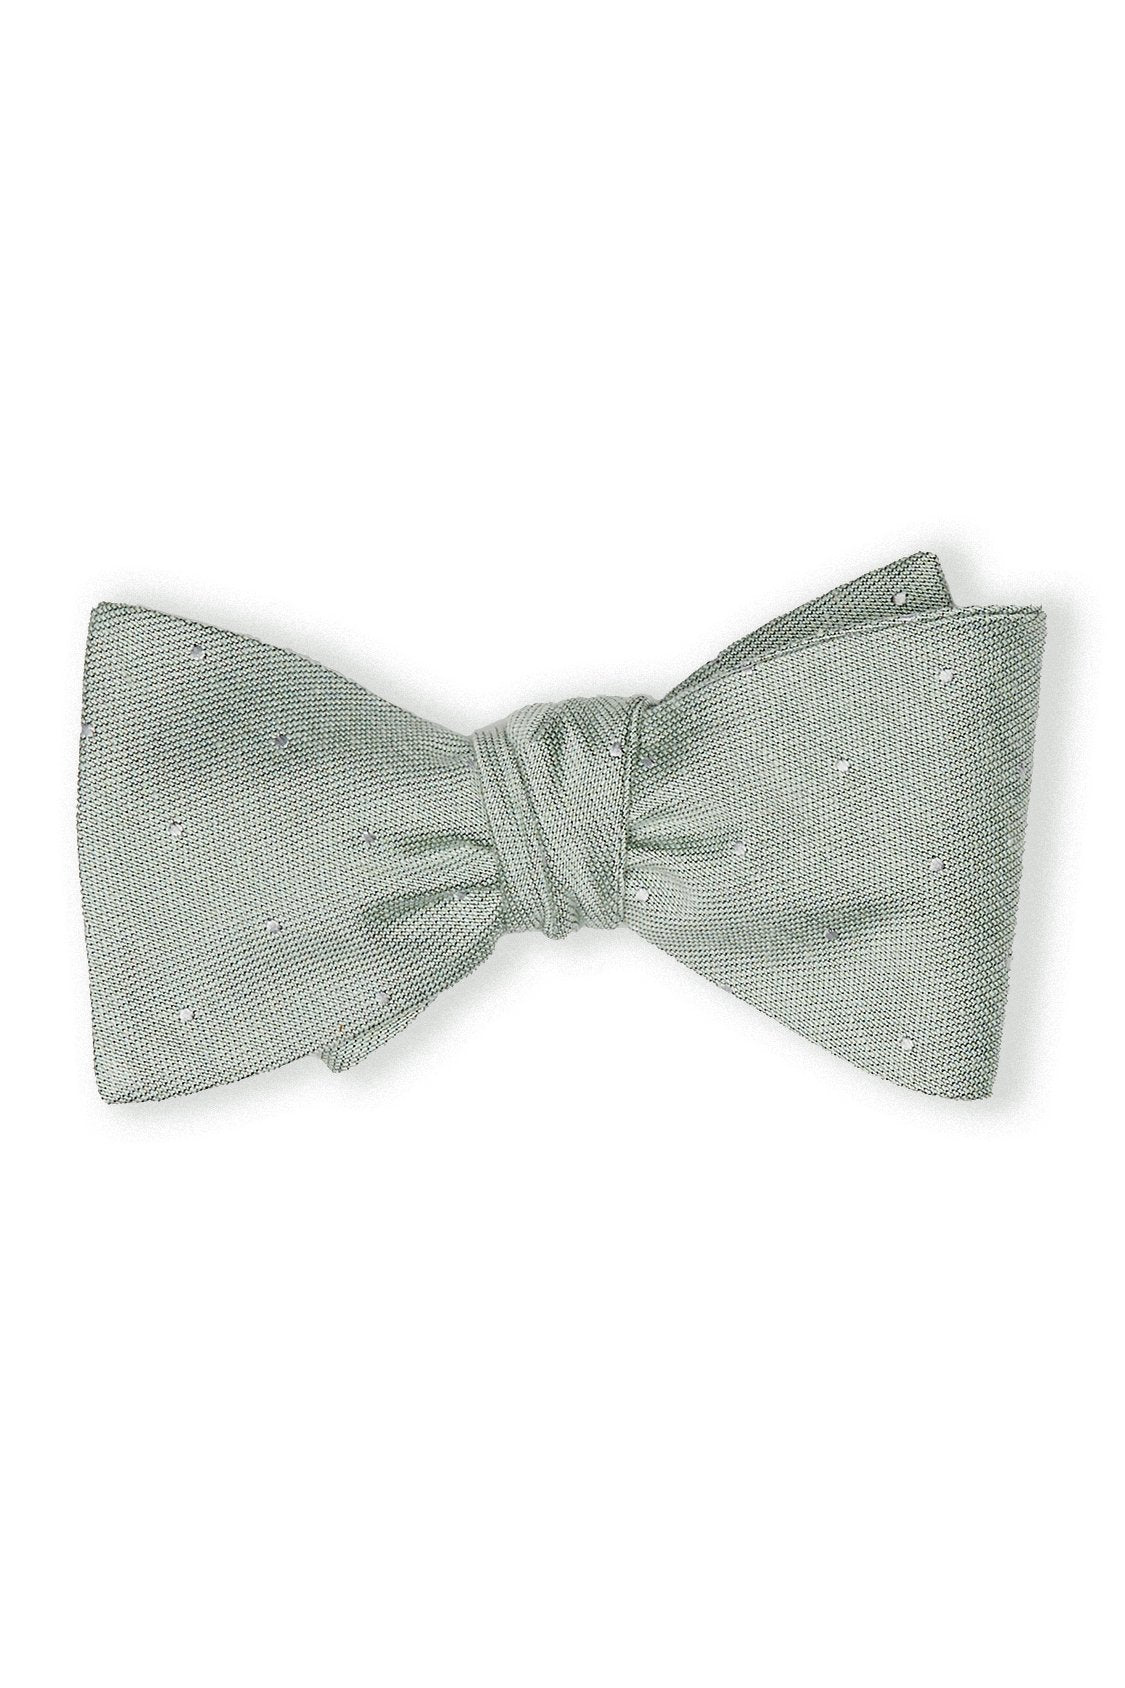 Daniel Bow Tie in Sage Dot by Birdy Grey, front view